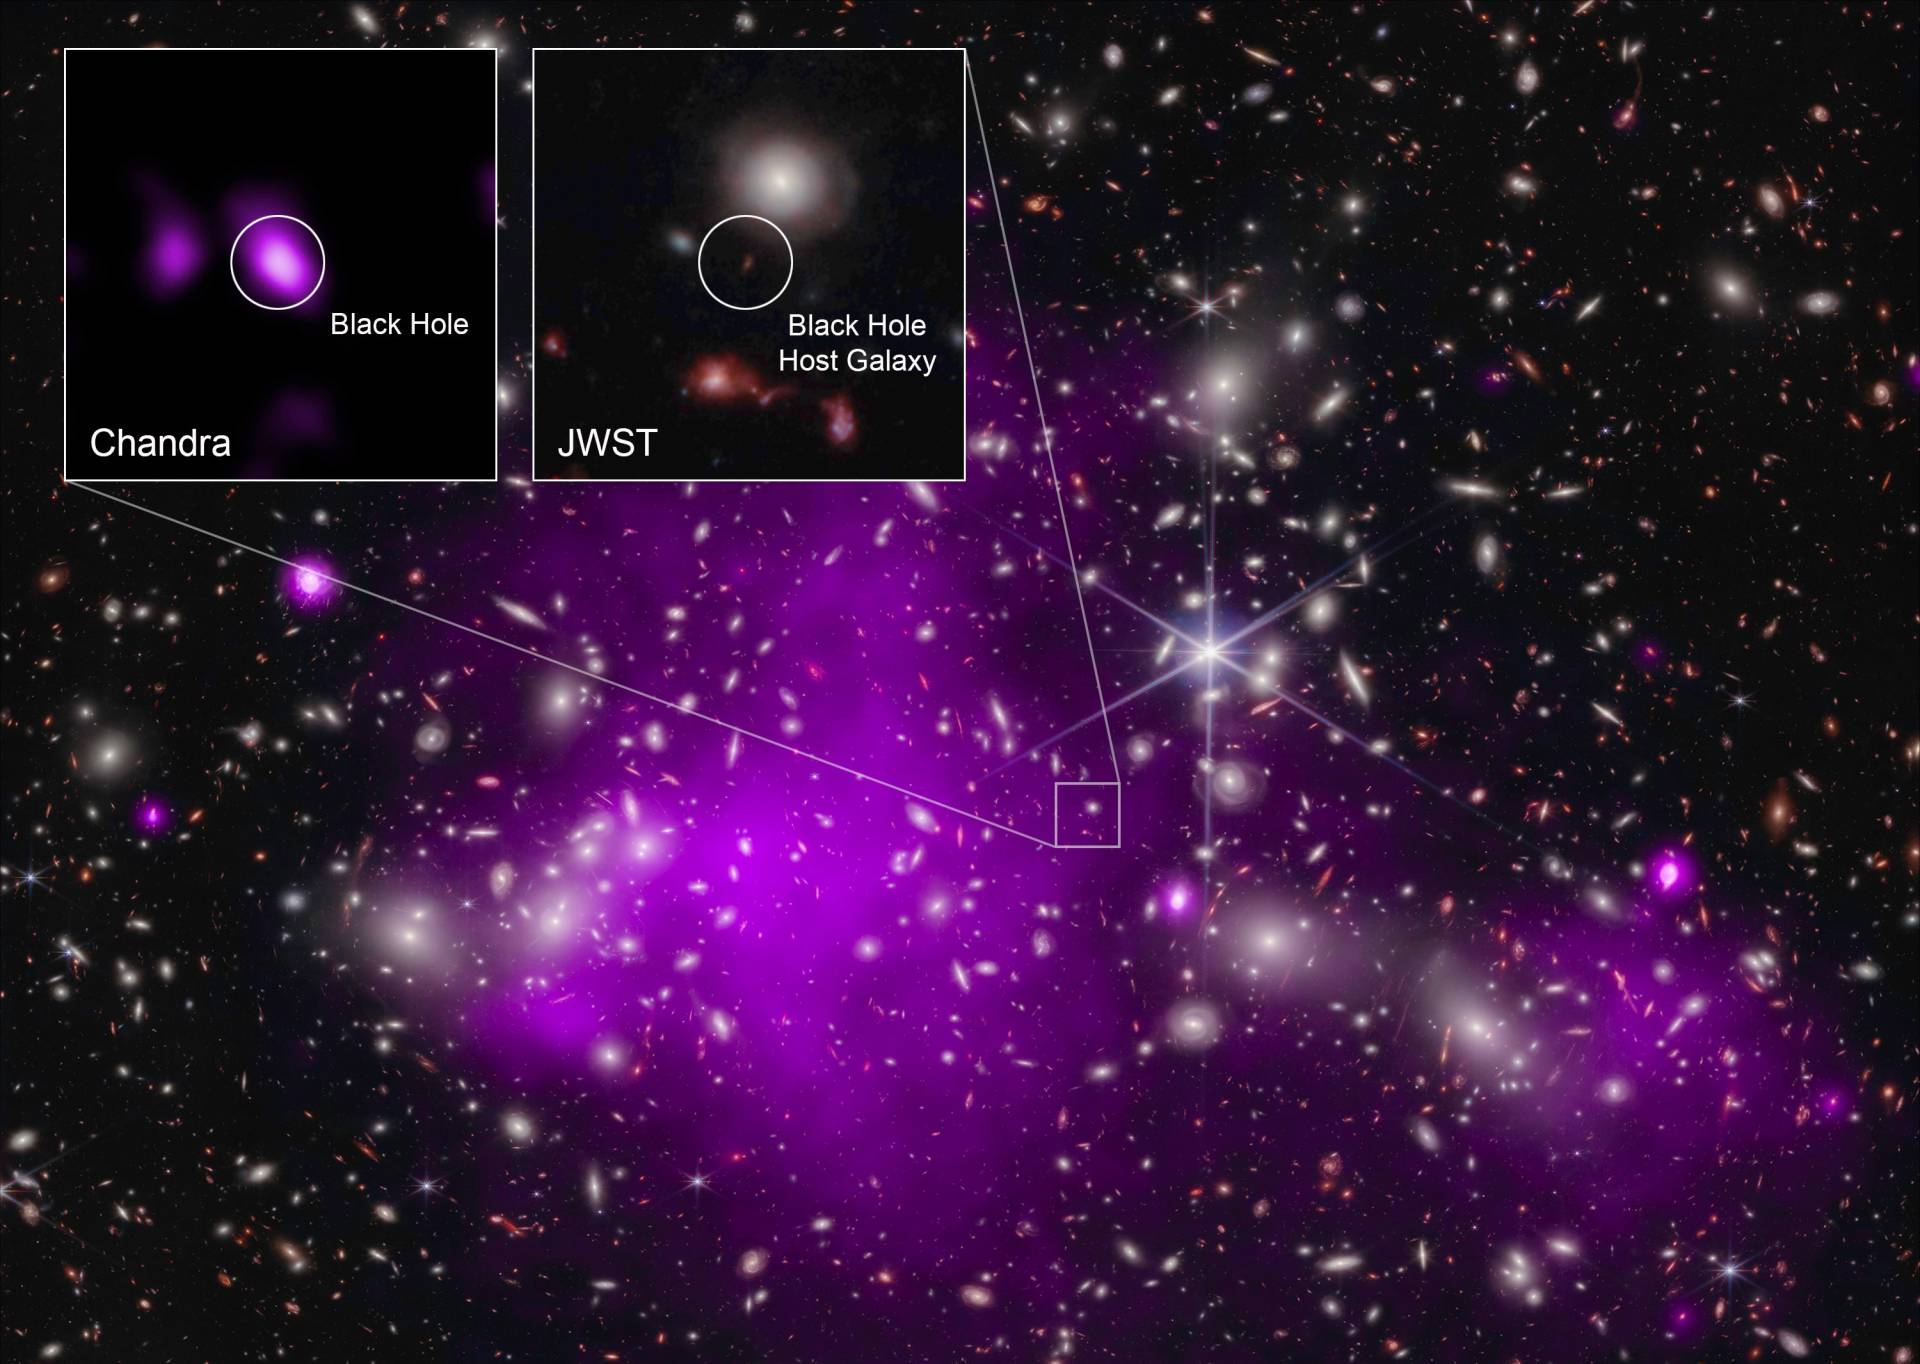 Section of space where a black hole and a black hole galaxy are labeled